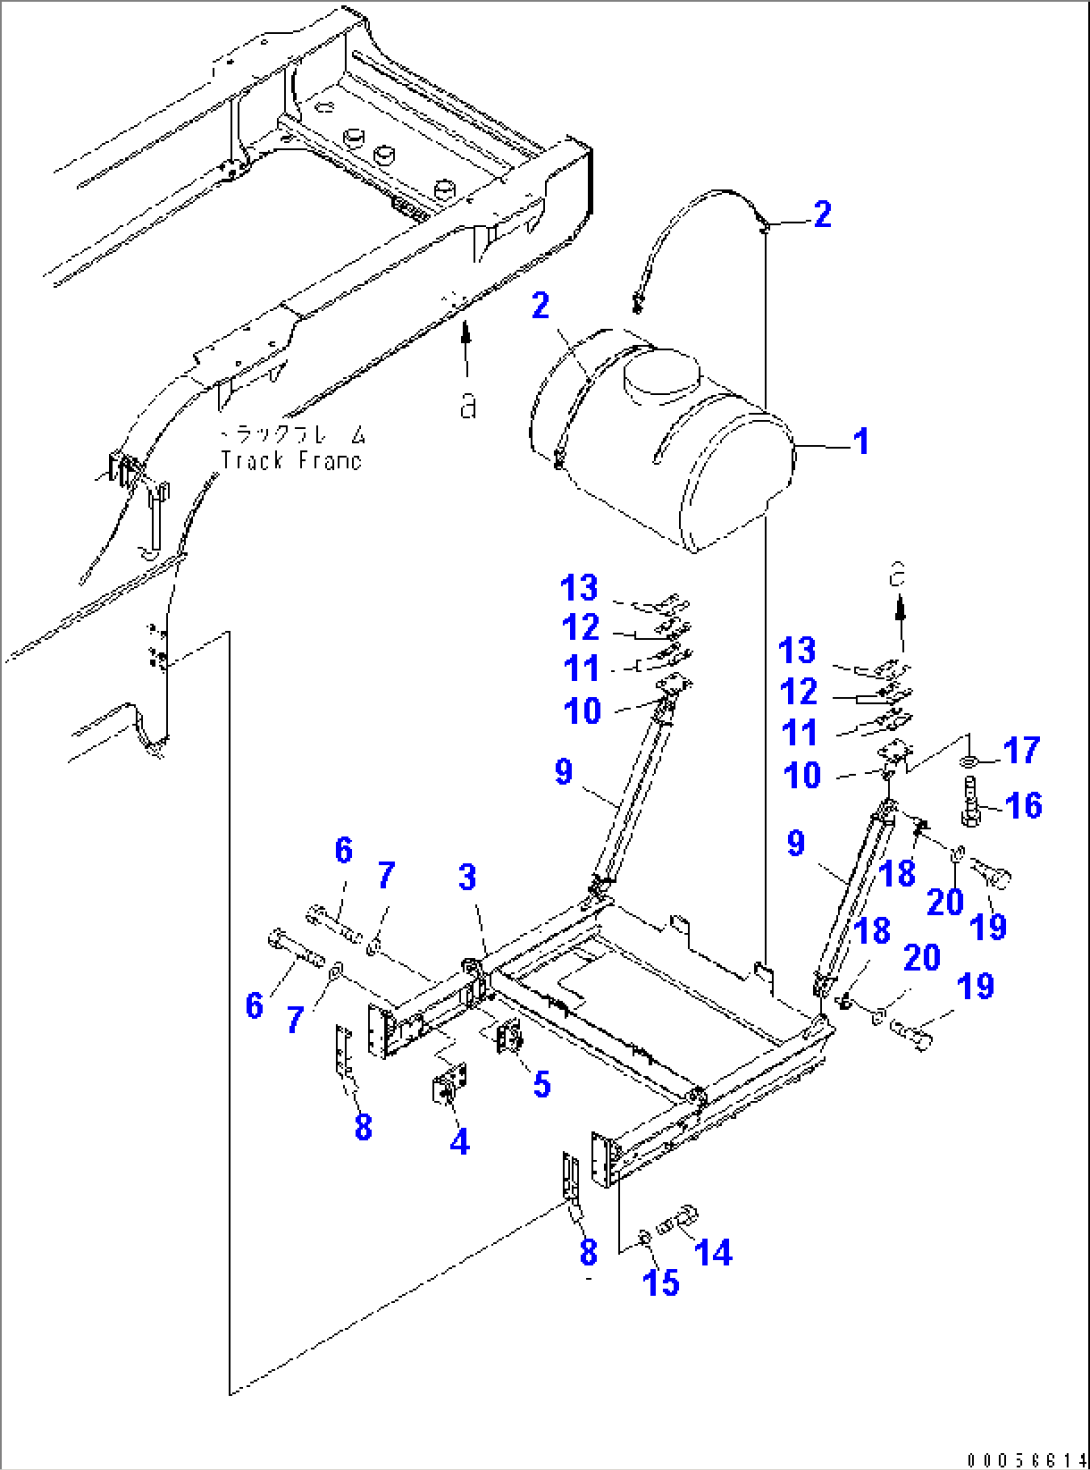 WATER TANK AND PUMP (TANK AND BRACKET)(#1001-1010)